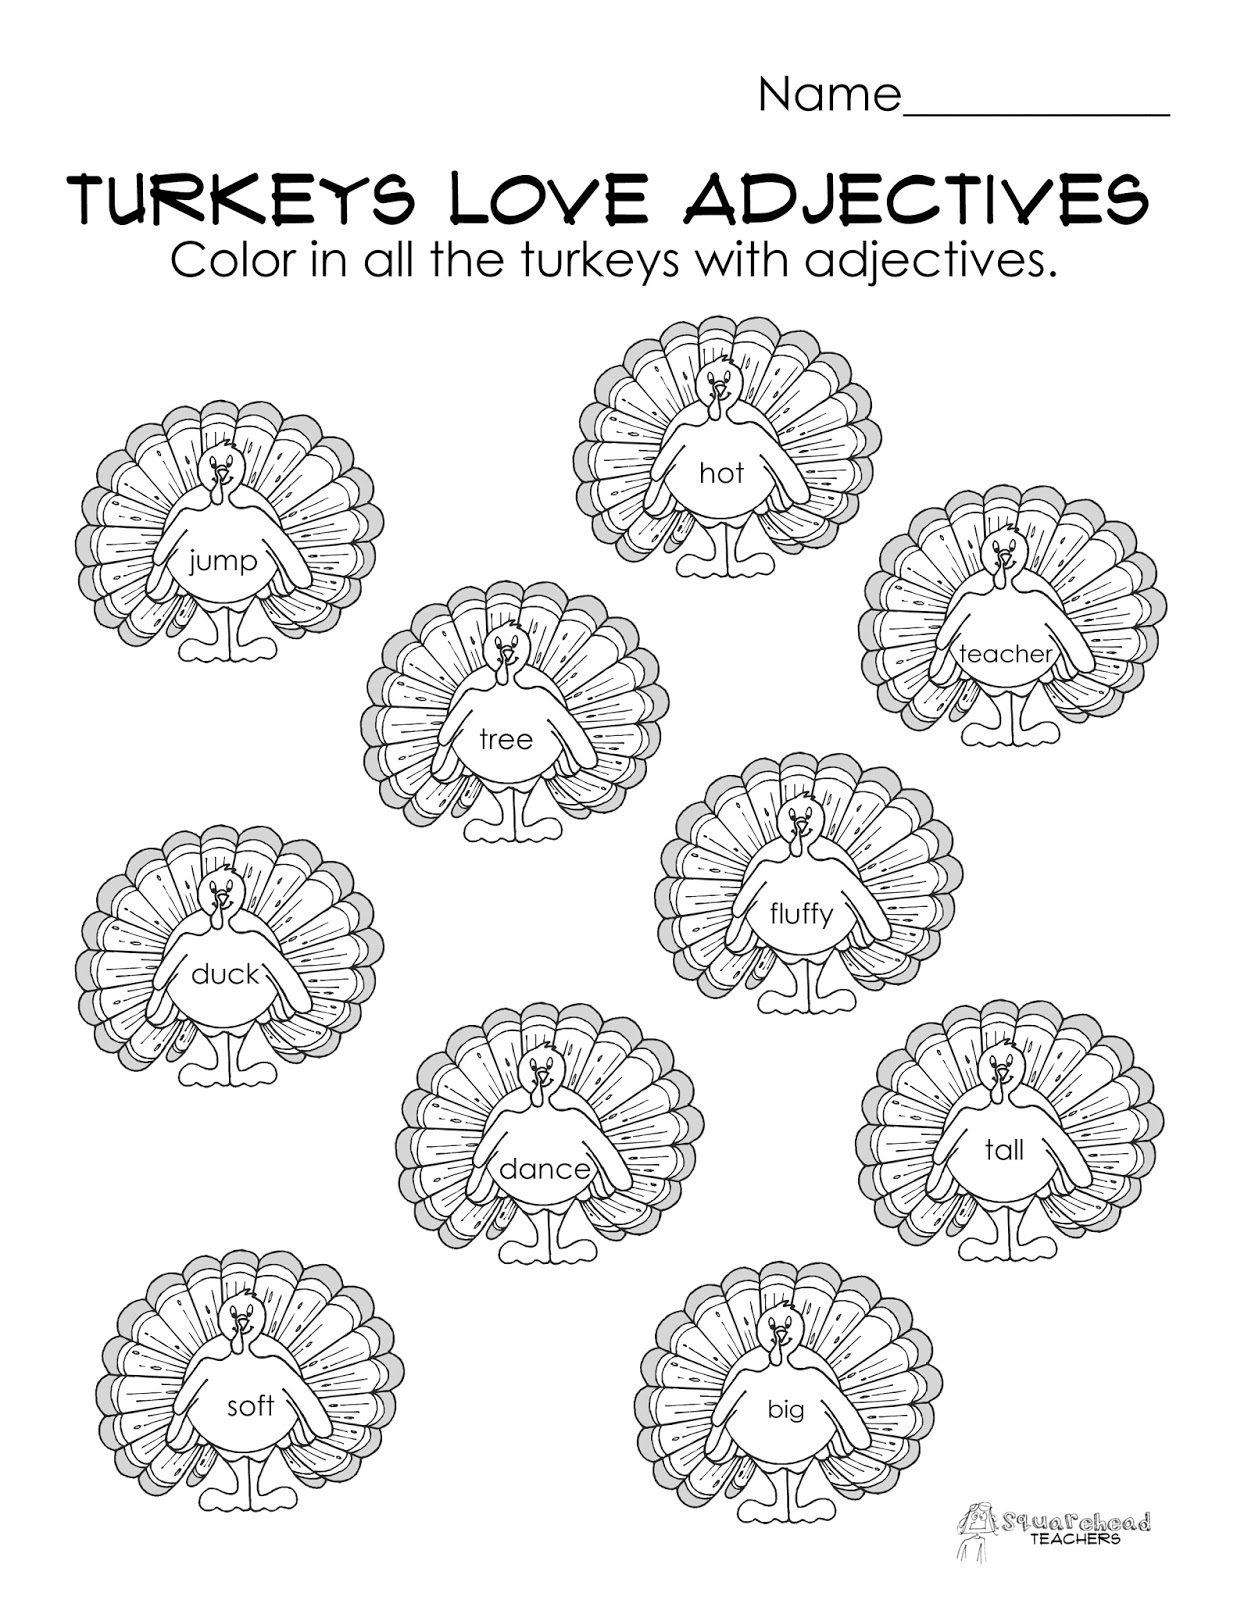 grade-1-sample-worksheets-on-nouns-verbs-and-adjectives